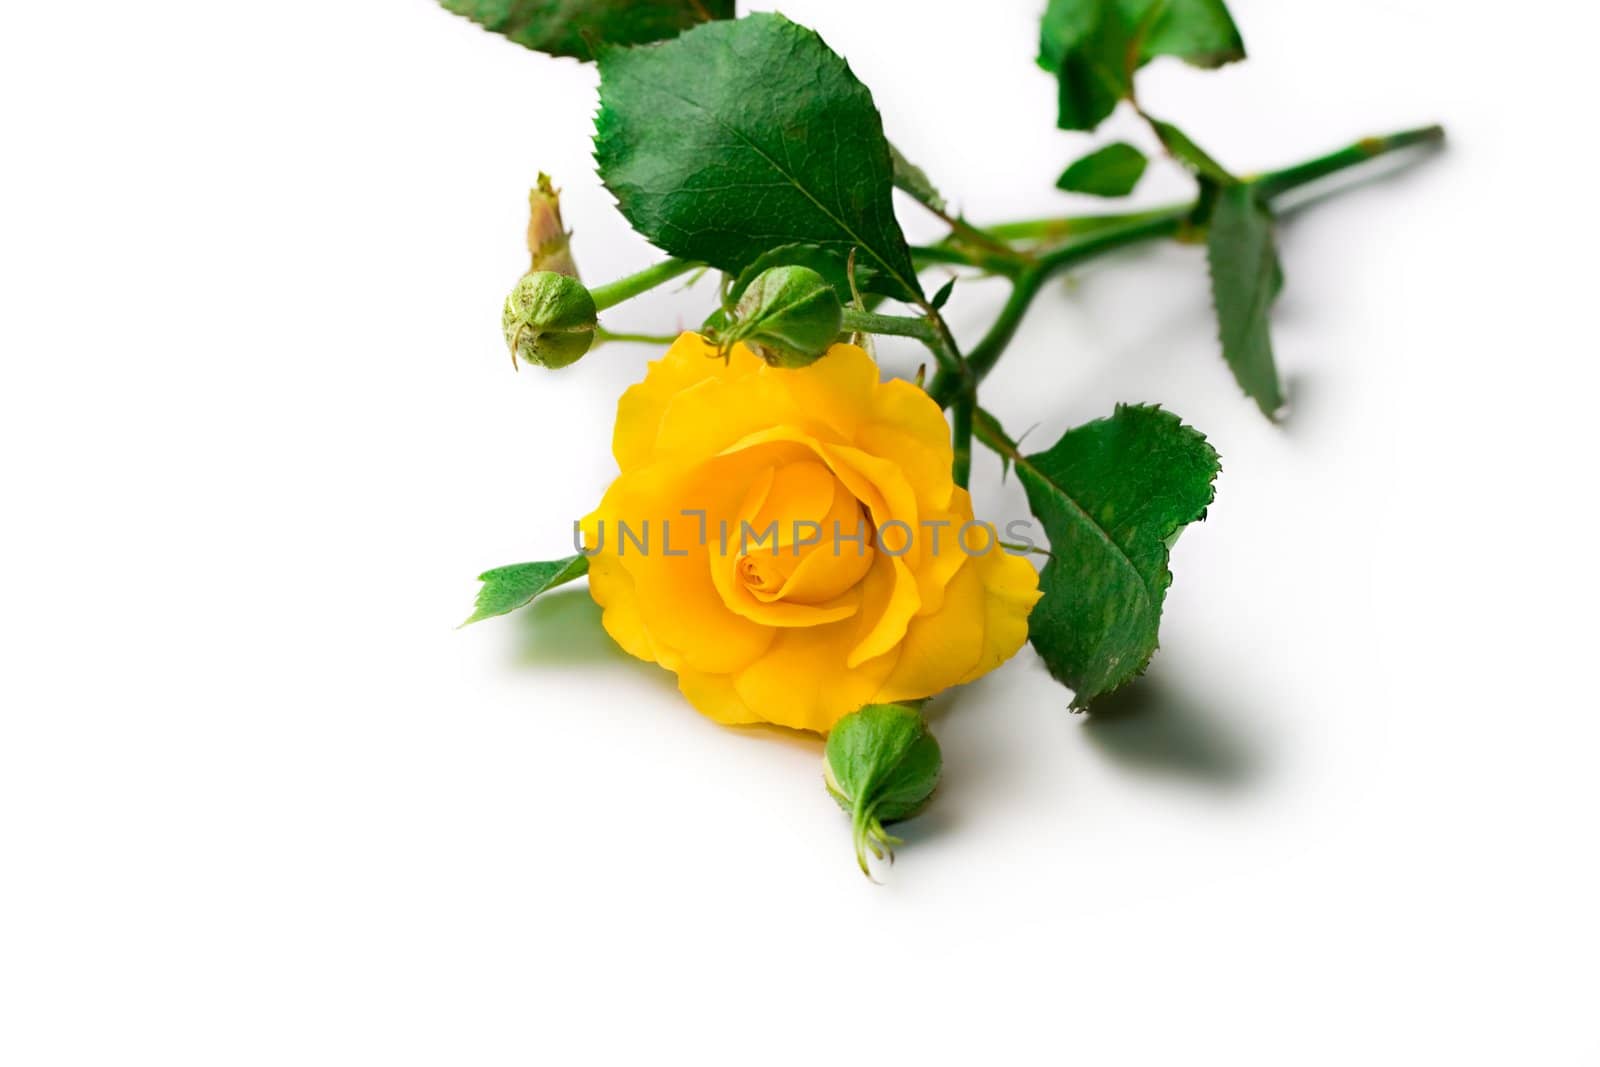 Yellow rose isolated on white